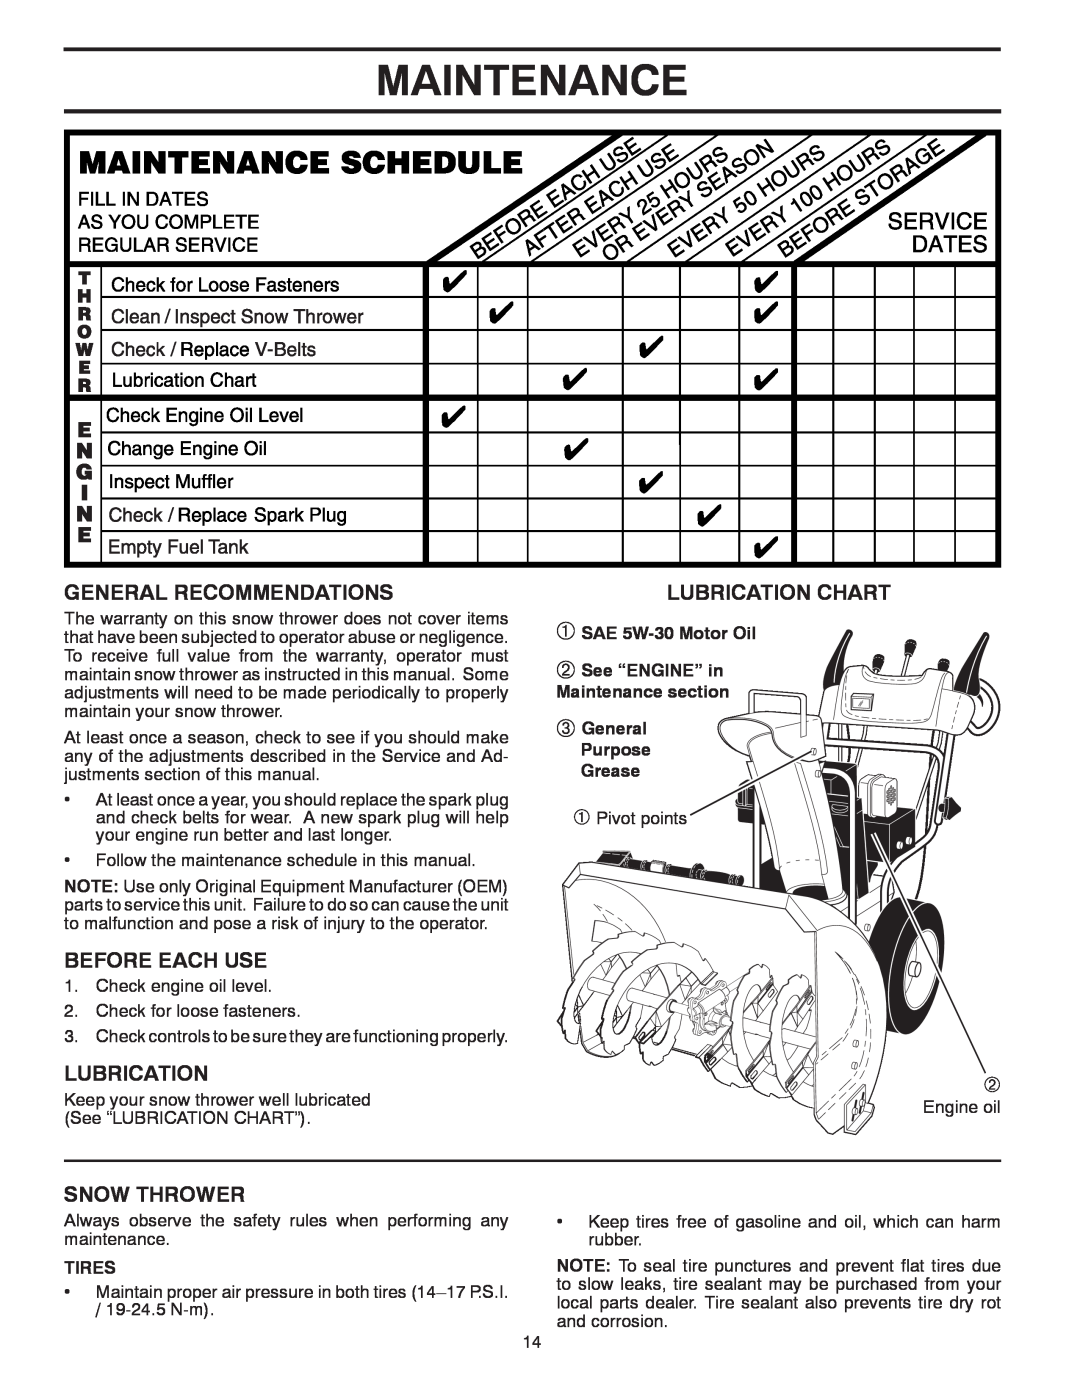 Poulan PP10527ES, 420923 Maintenance, General Recommendations, Before Each Use, Snow Thrower, Lubrication Chart, Tires 